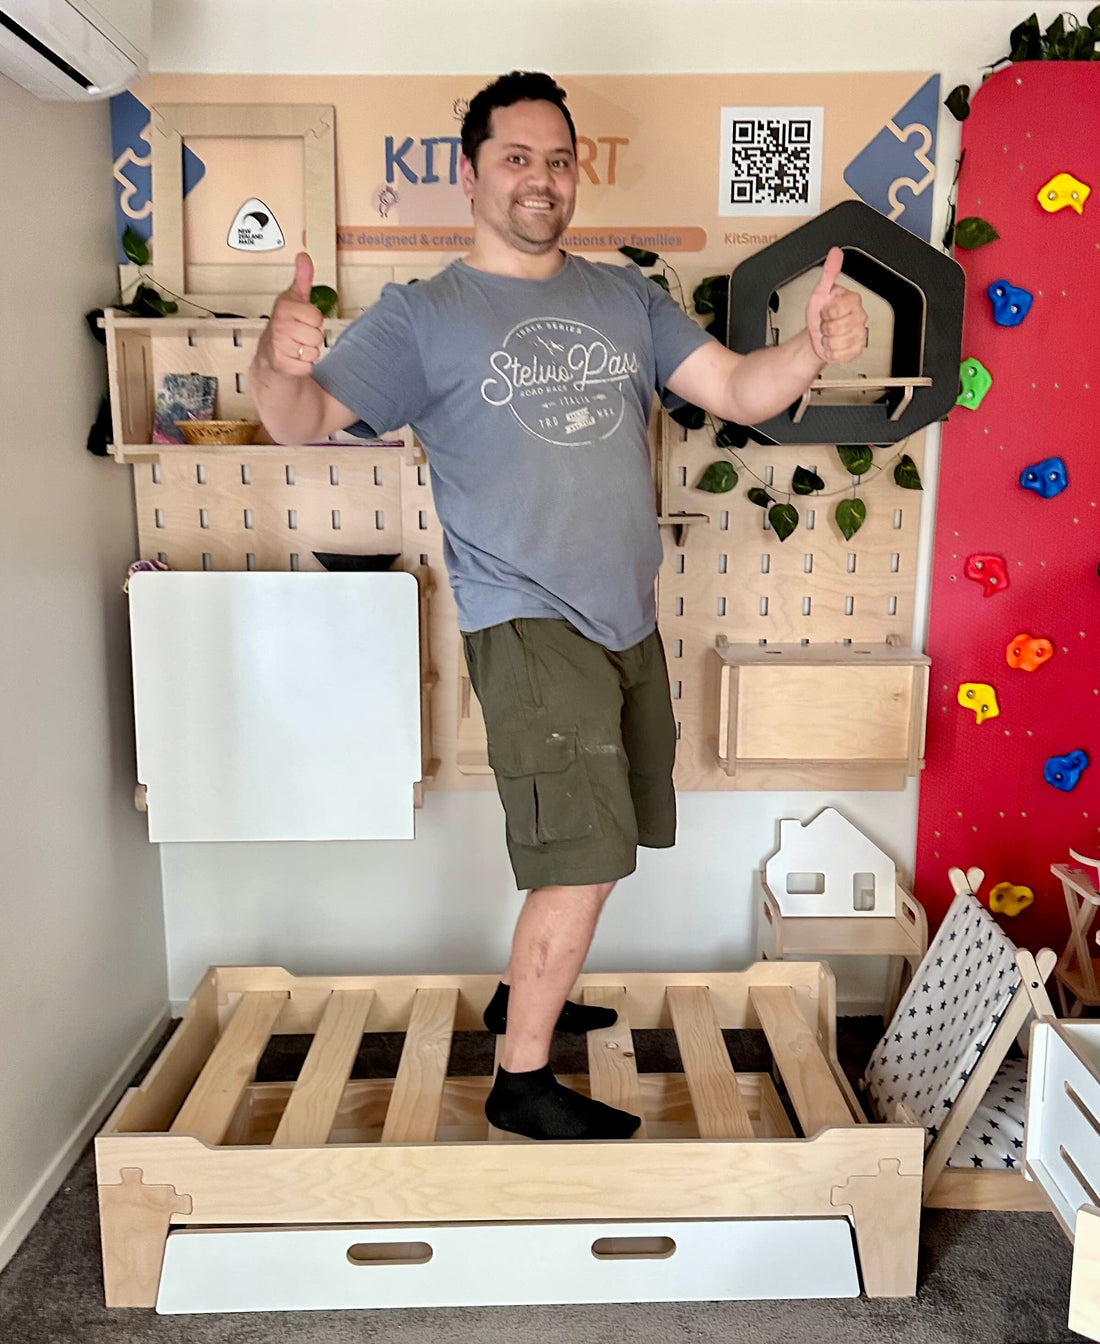 Unveiling our robust safety tests for kids' beds: Watch a 110kg team member's jump test on Montessori and bunk beds, ensuring top-notch durability.